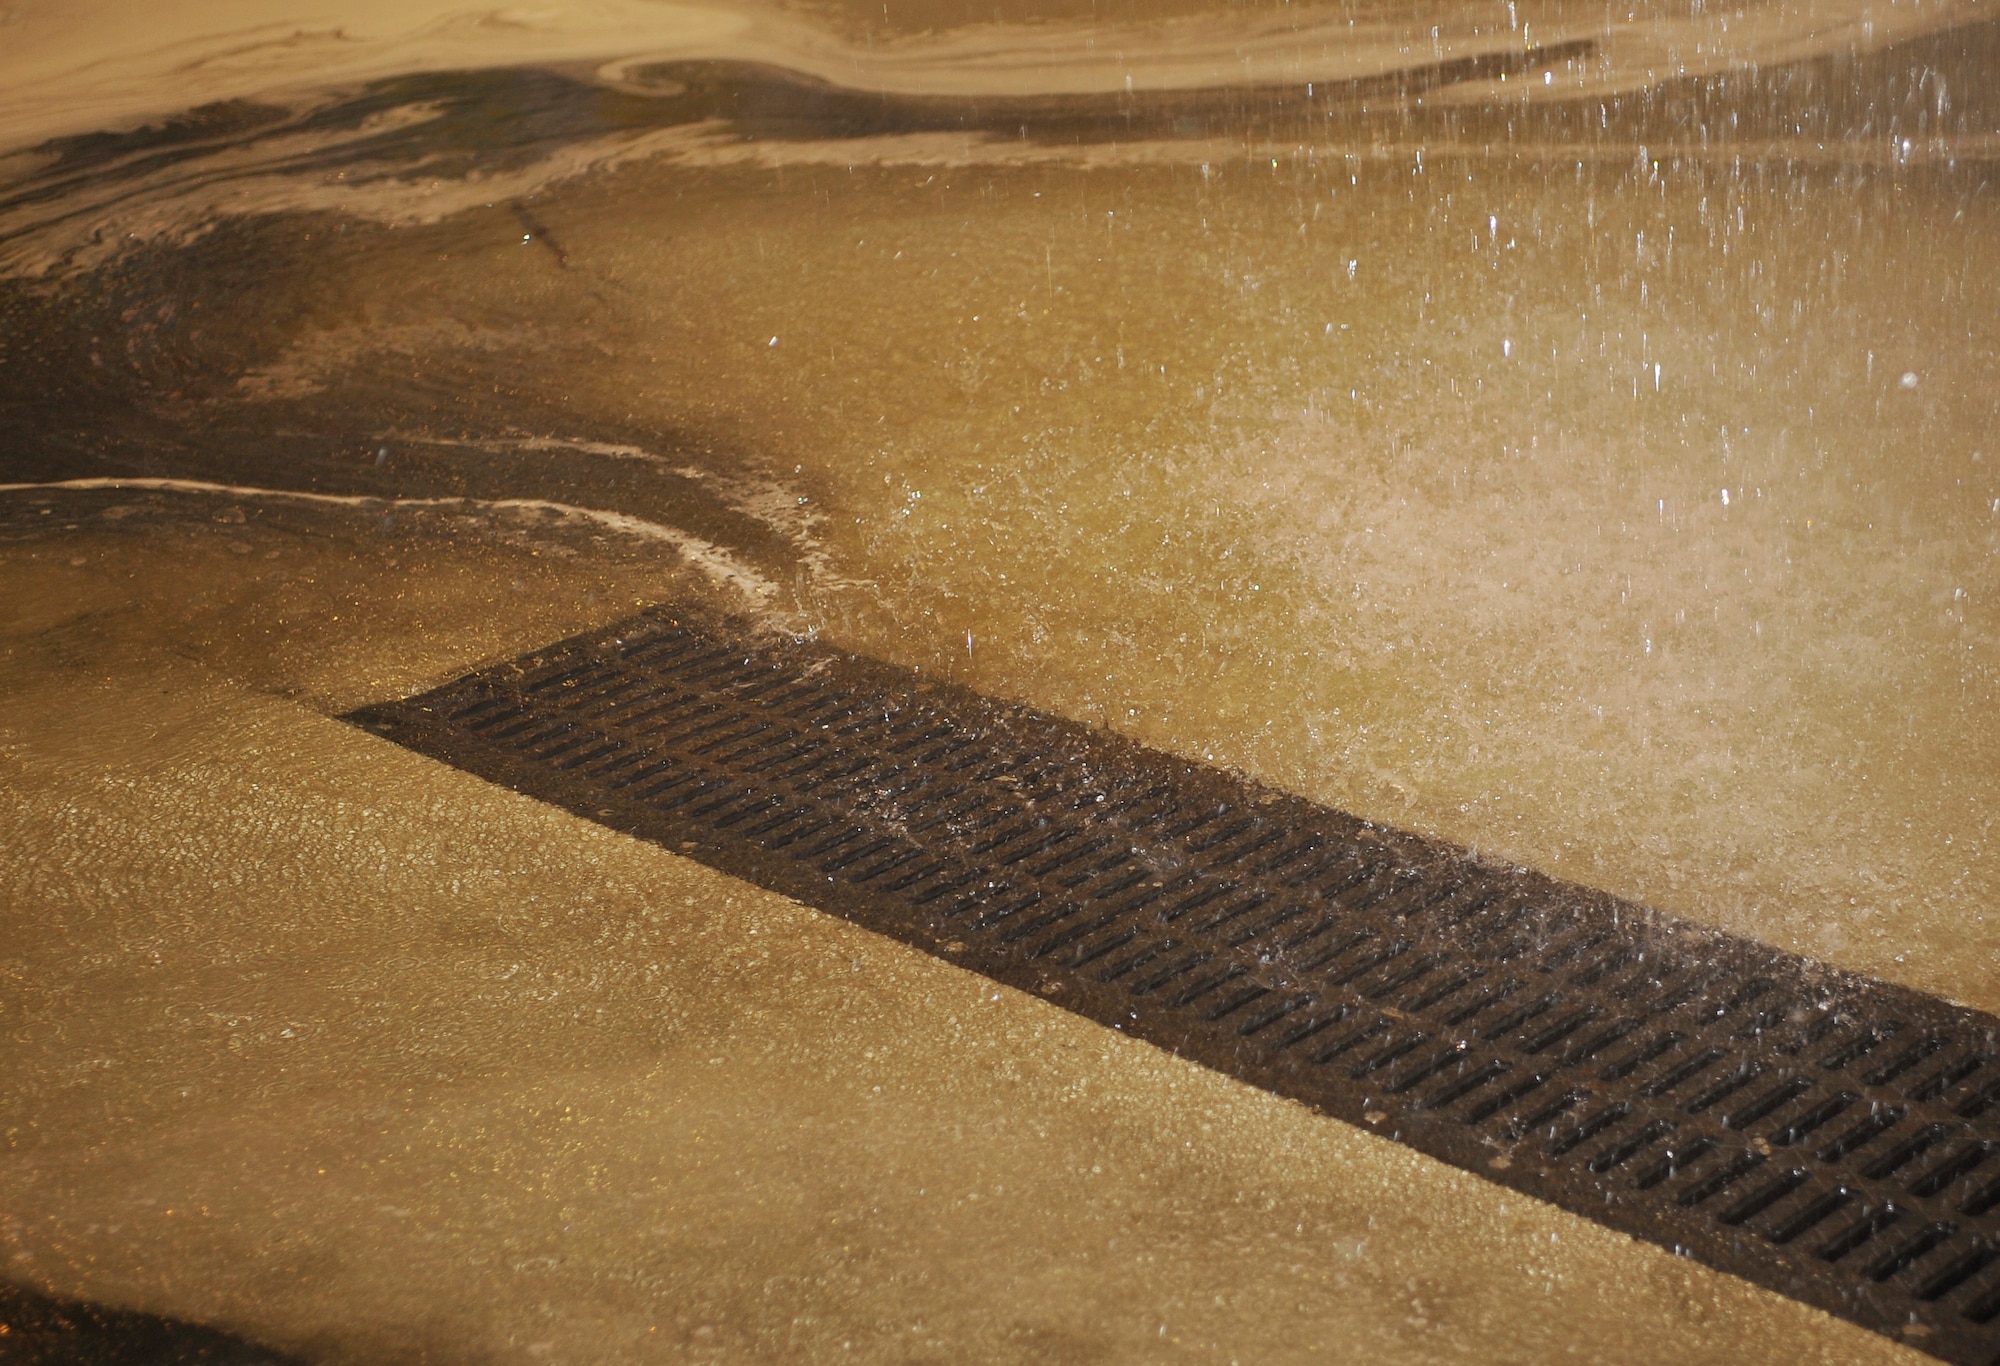 Water flows to drains in the floor of hangar five during a biennial fire suppression system test, Feb. 19, 2015 at Ramstein Air Base, Germany. The test is done to ensure the system is working properly and can affectively distinguish possible fires in the future. (U.S. Air Force photo/Airman 1st Class Larissa Greatwood)